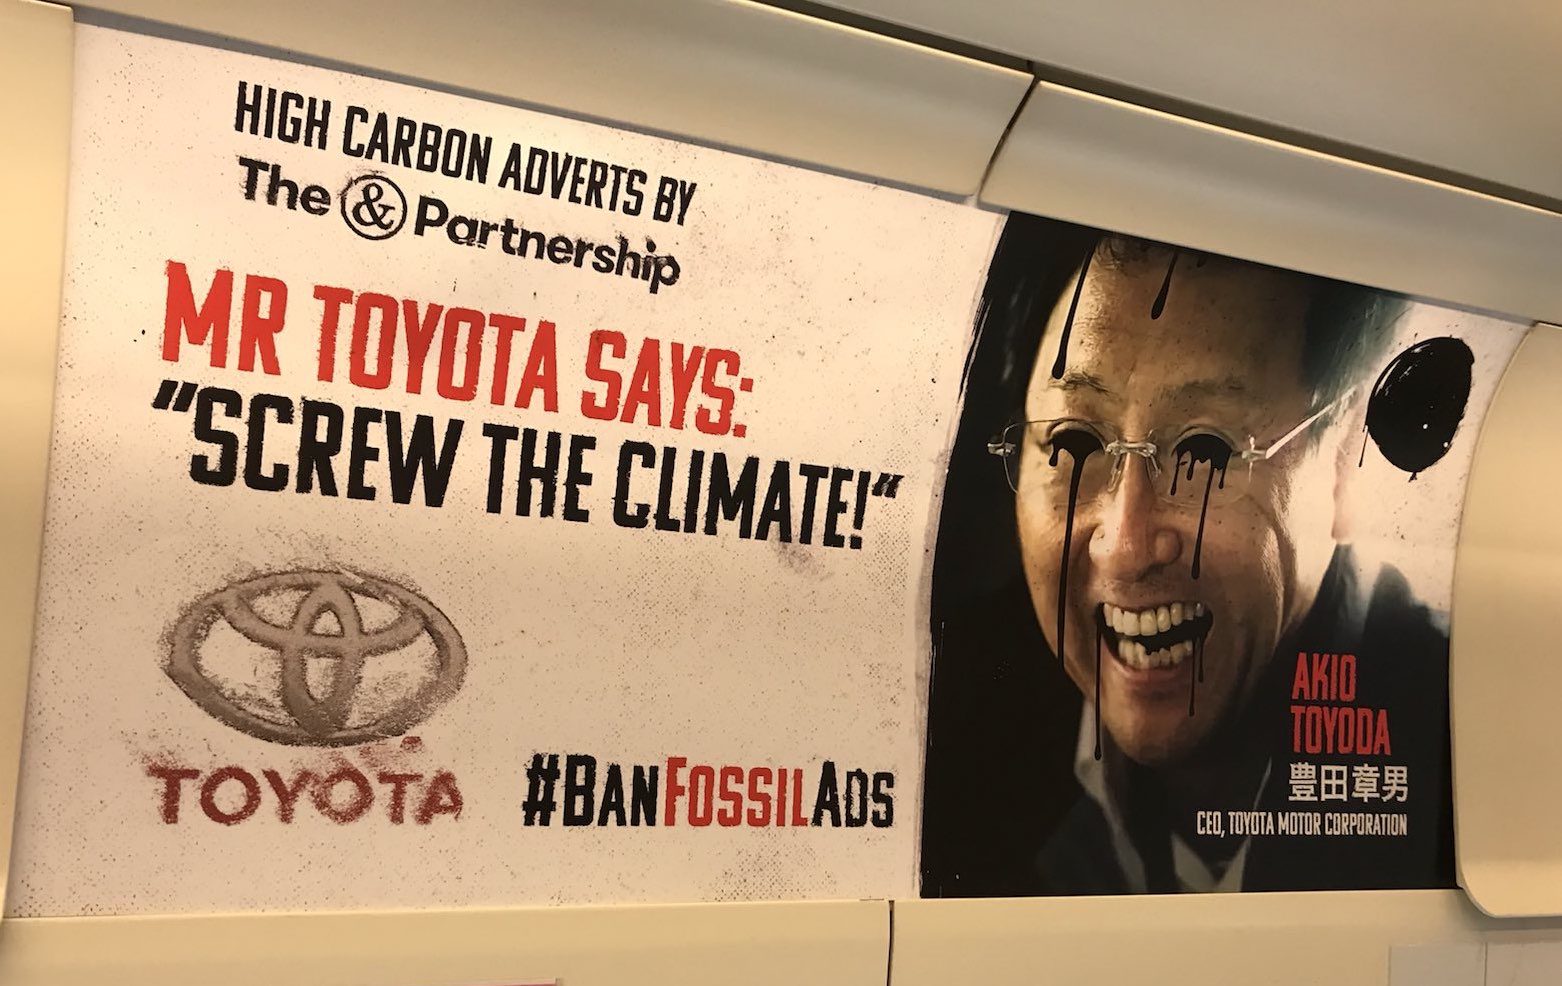 Toyota hacked tube advertisment